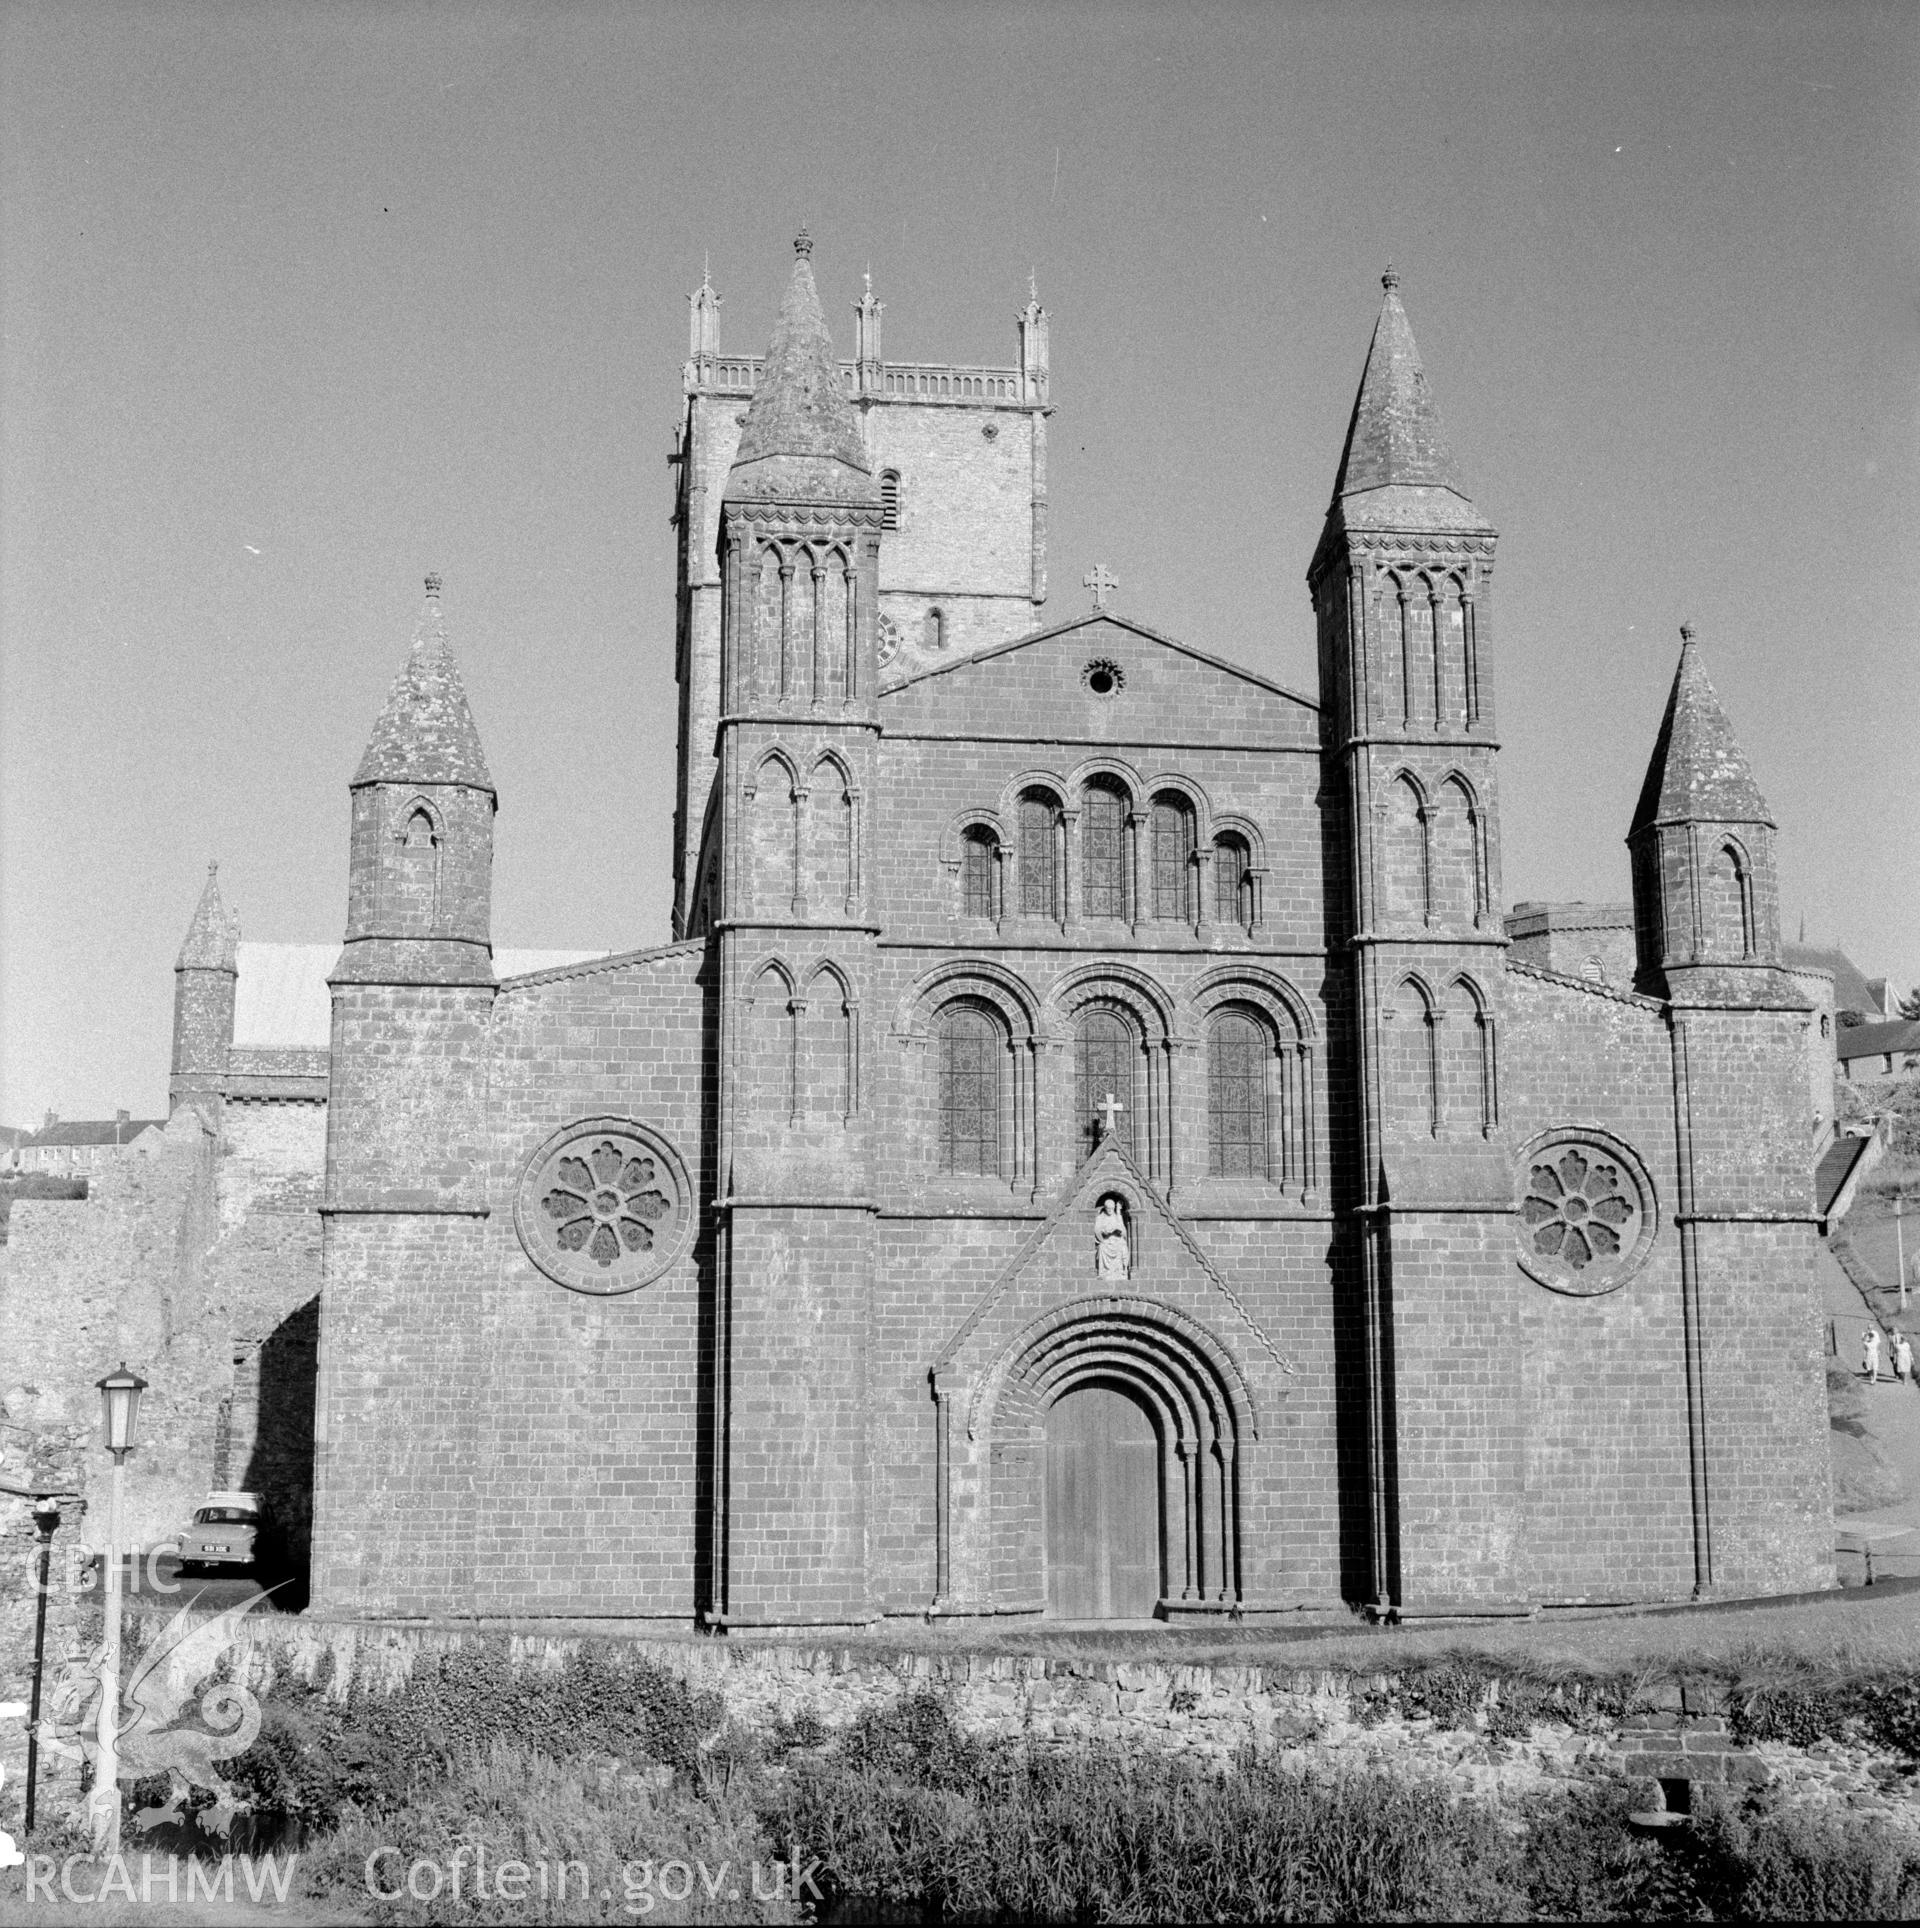 Digital copy of an acetate negative showing St David's Cathedral, 15th September 1967.